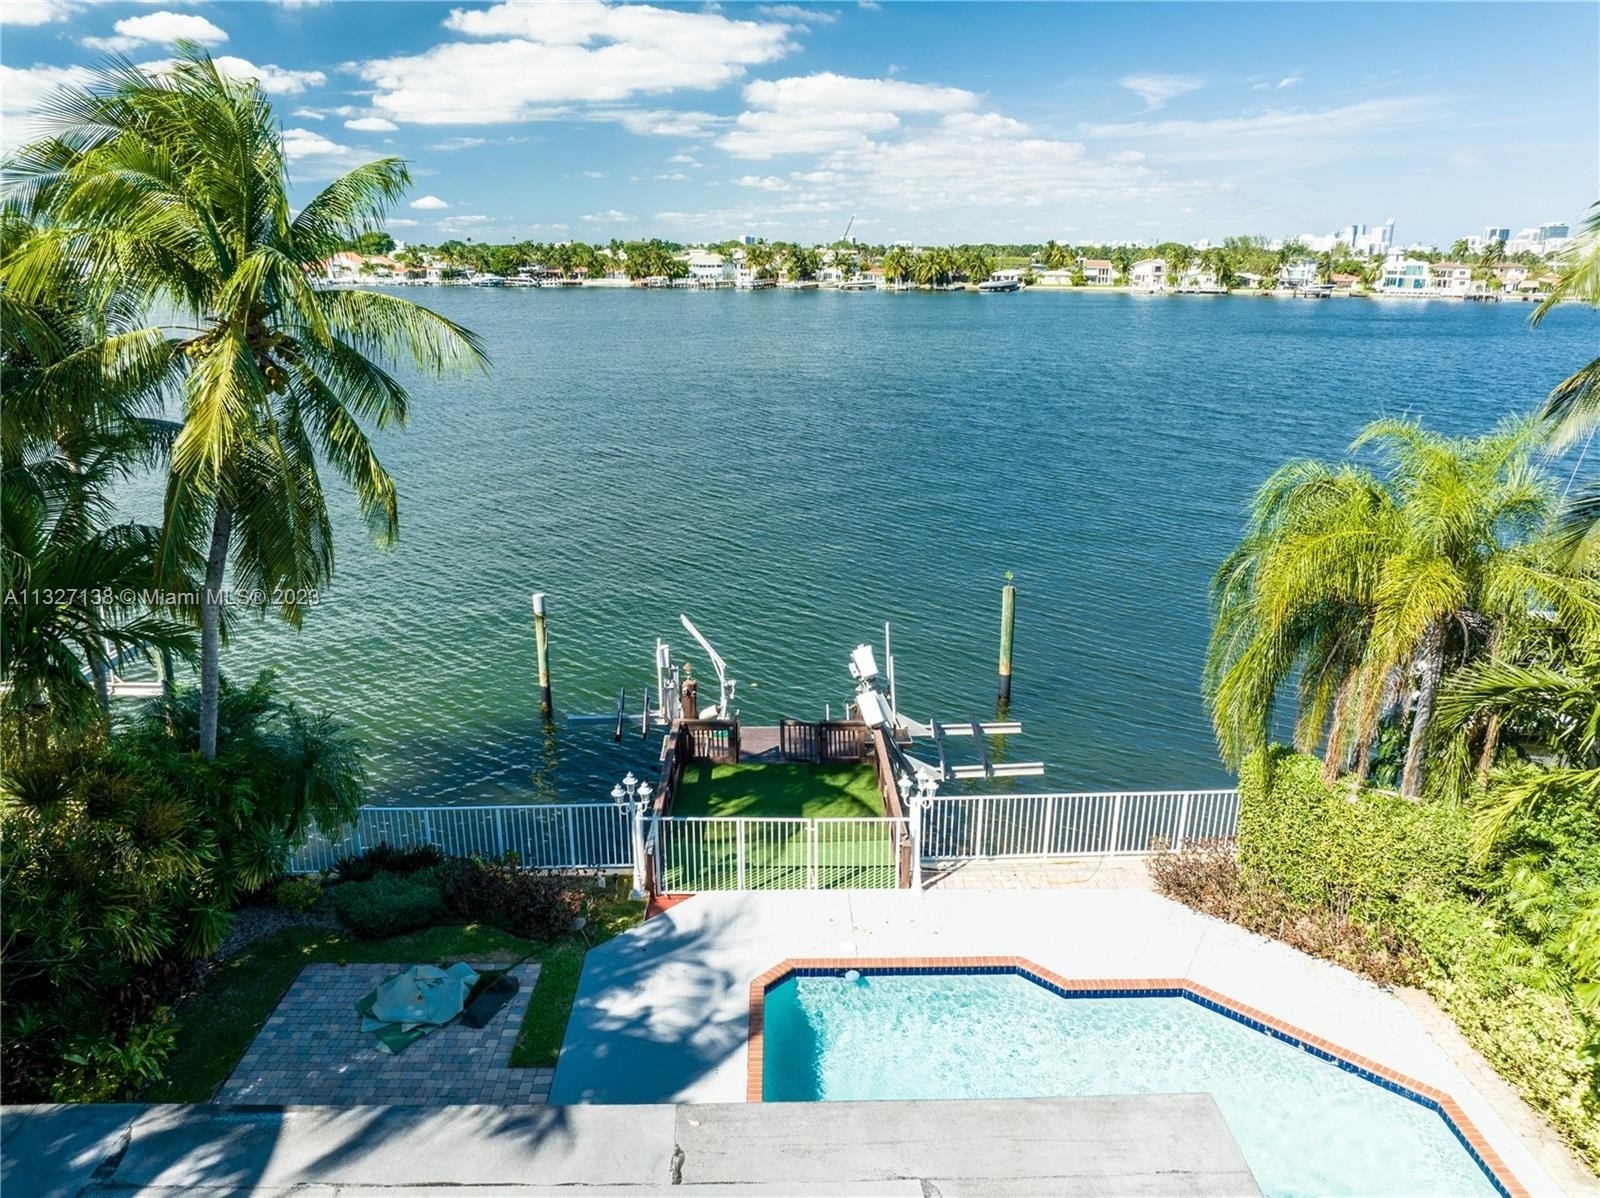 Single Family Home at 1375 N Biscayne Point Rd , 1375 Miami Beach